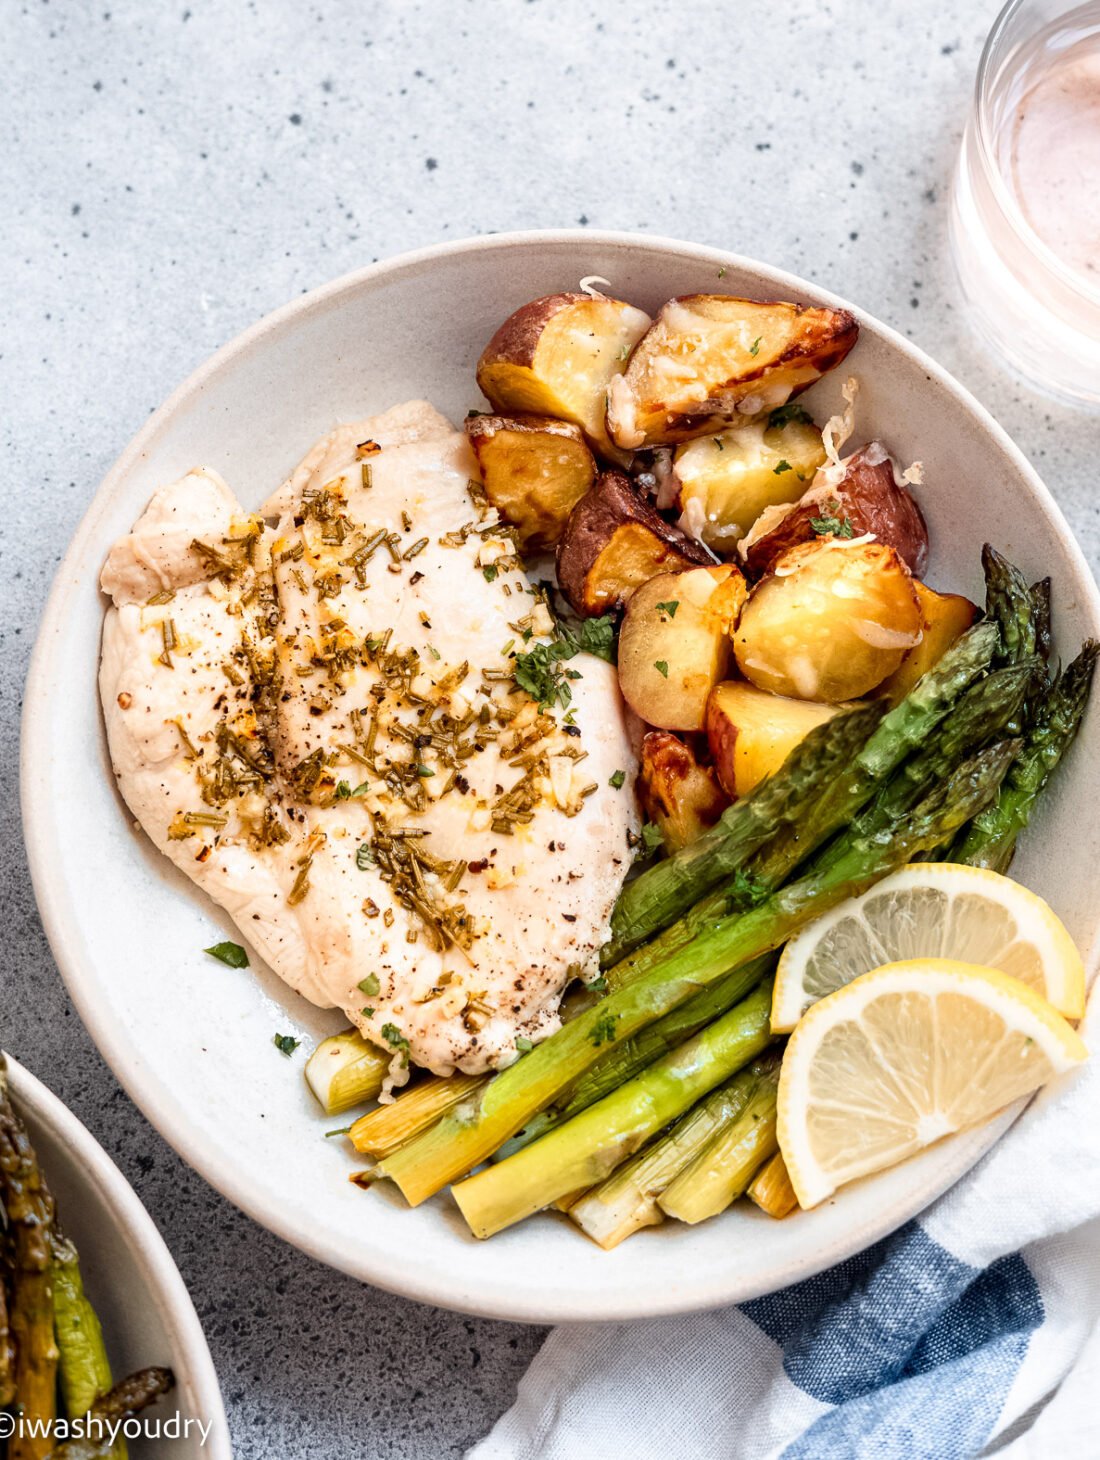 Baked lemon garlic chicken with potatoes, asparagus and lemon slices on a white plate.